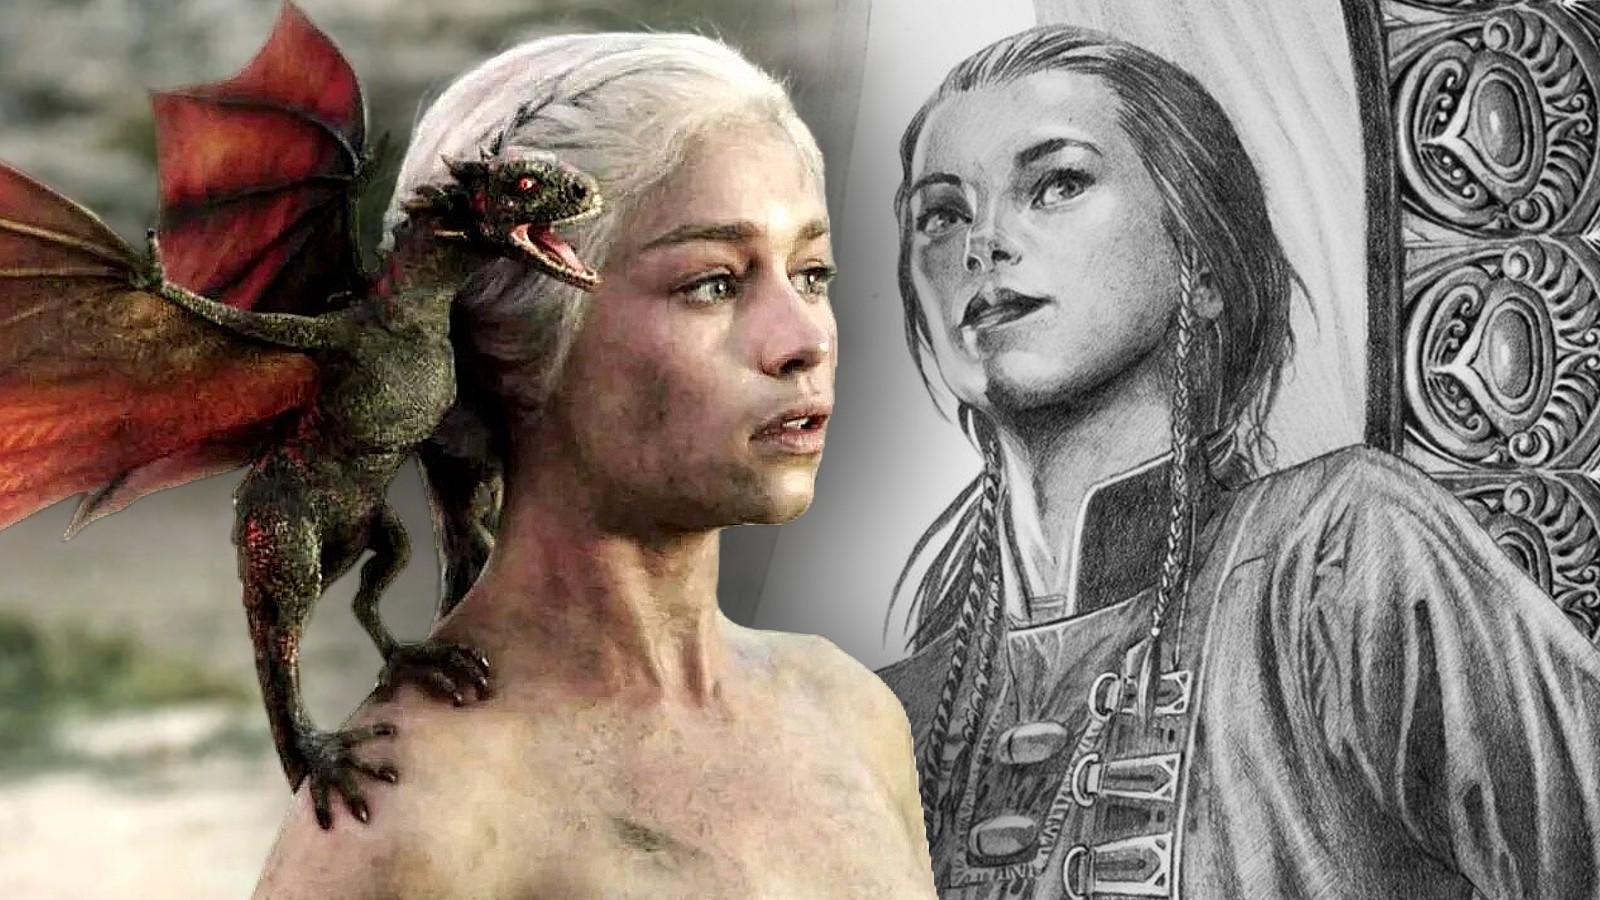 Daenerys in Game of Thrones and Elissa Farman from Fire and Blood